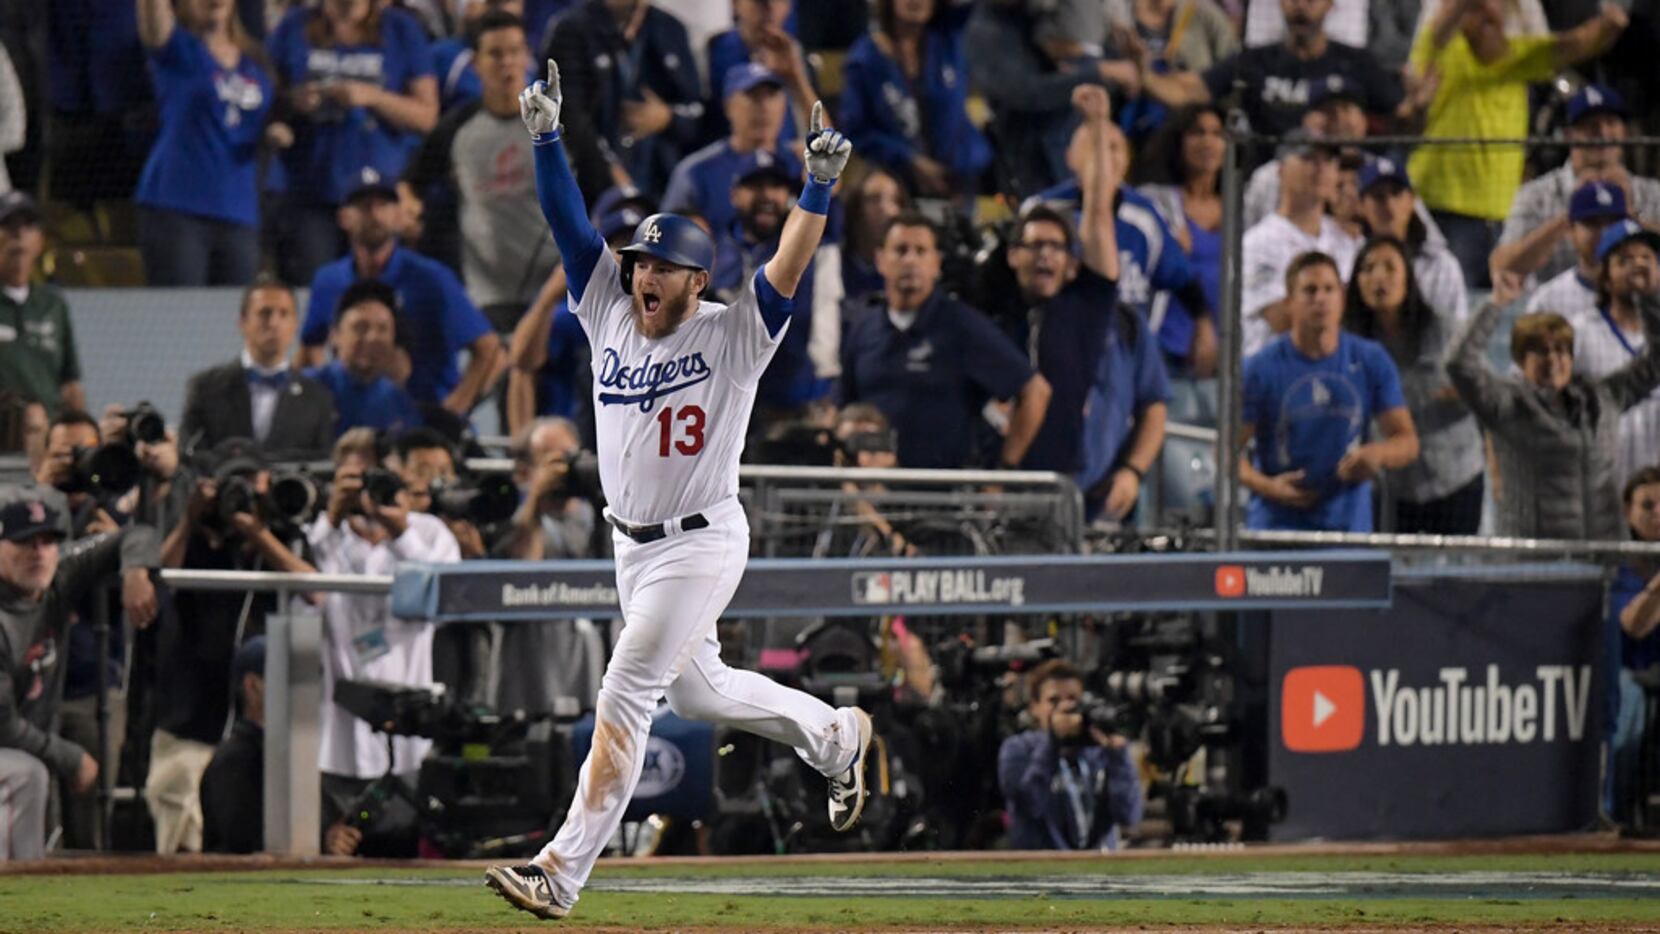 Austin Barnes battled to earn his moment in World Series Game 3